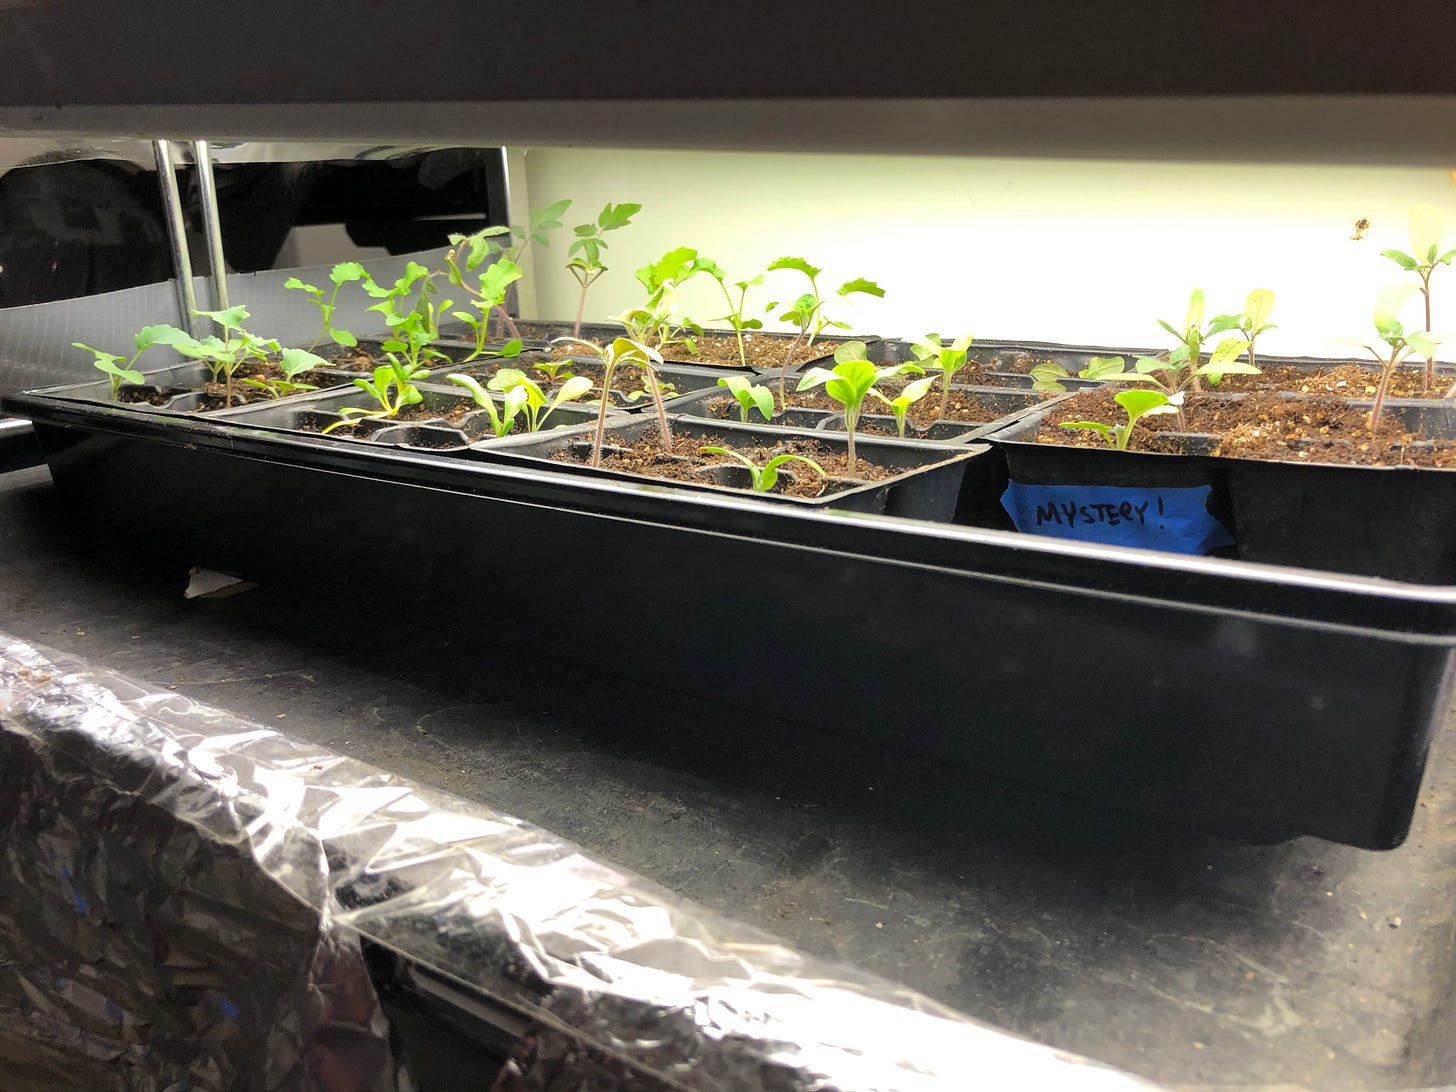 A seedling tray full of small plants under a grow light. One of the cels has a piece of tape that has "Mystery!" written on it.